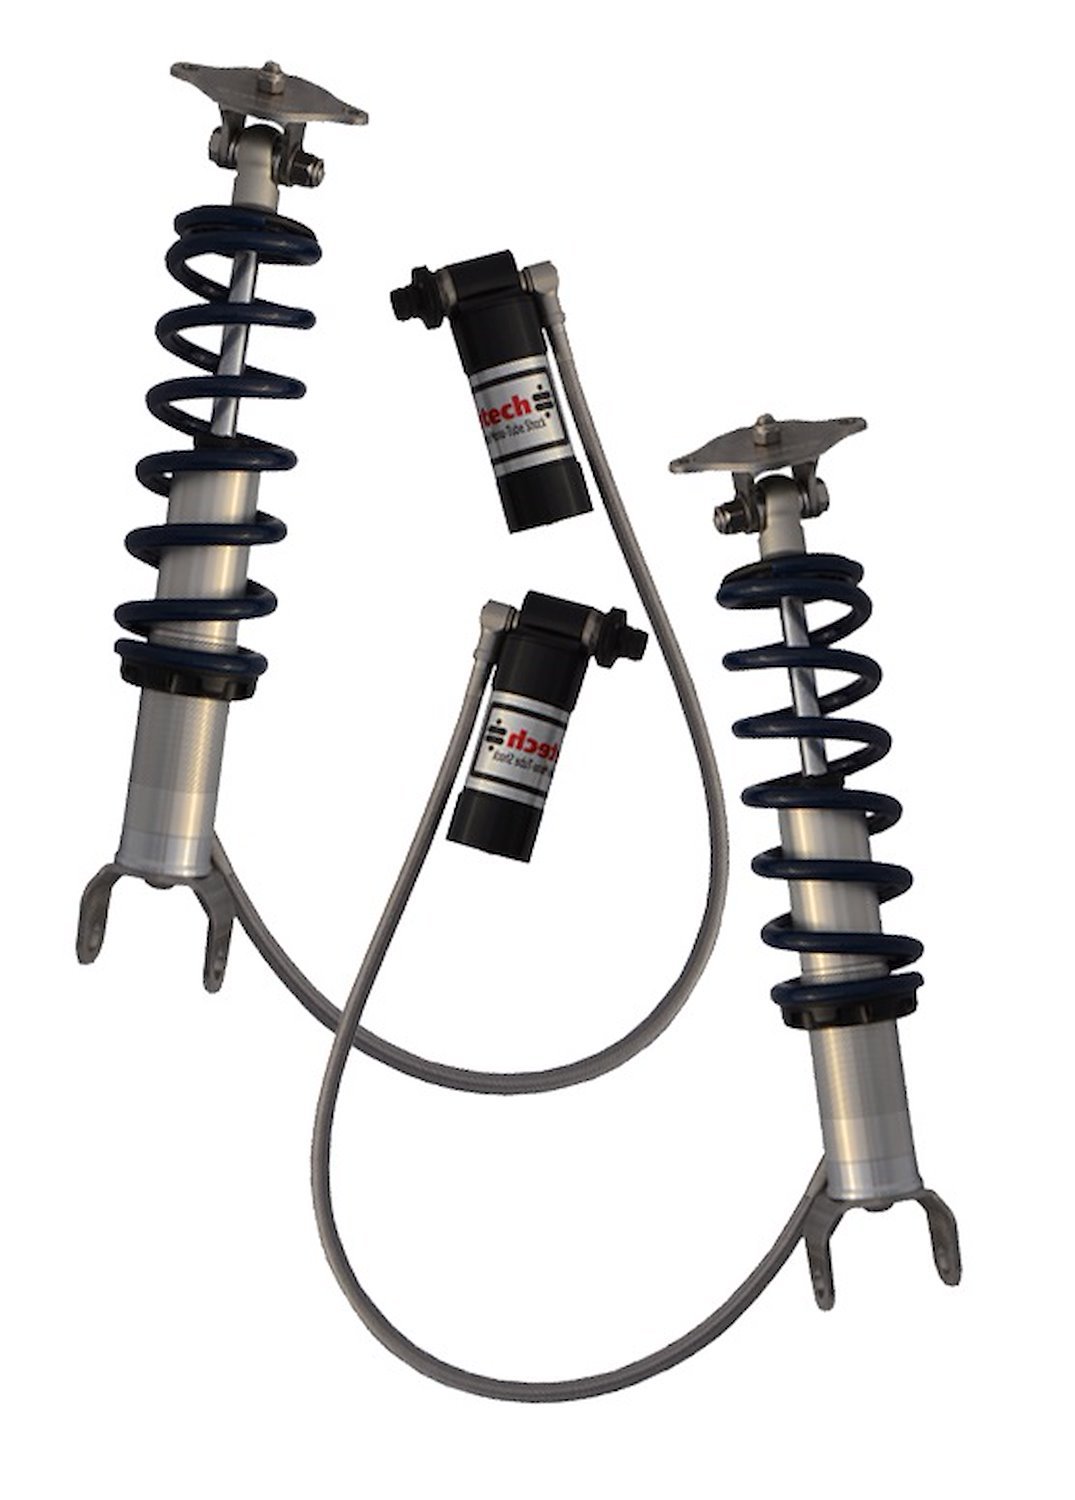 TQ Series rear CoilOvers for 97-13 Corvette. Sold as pair.